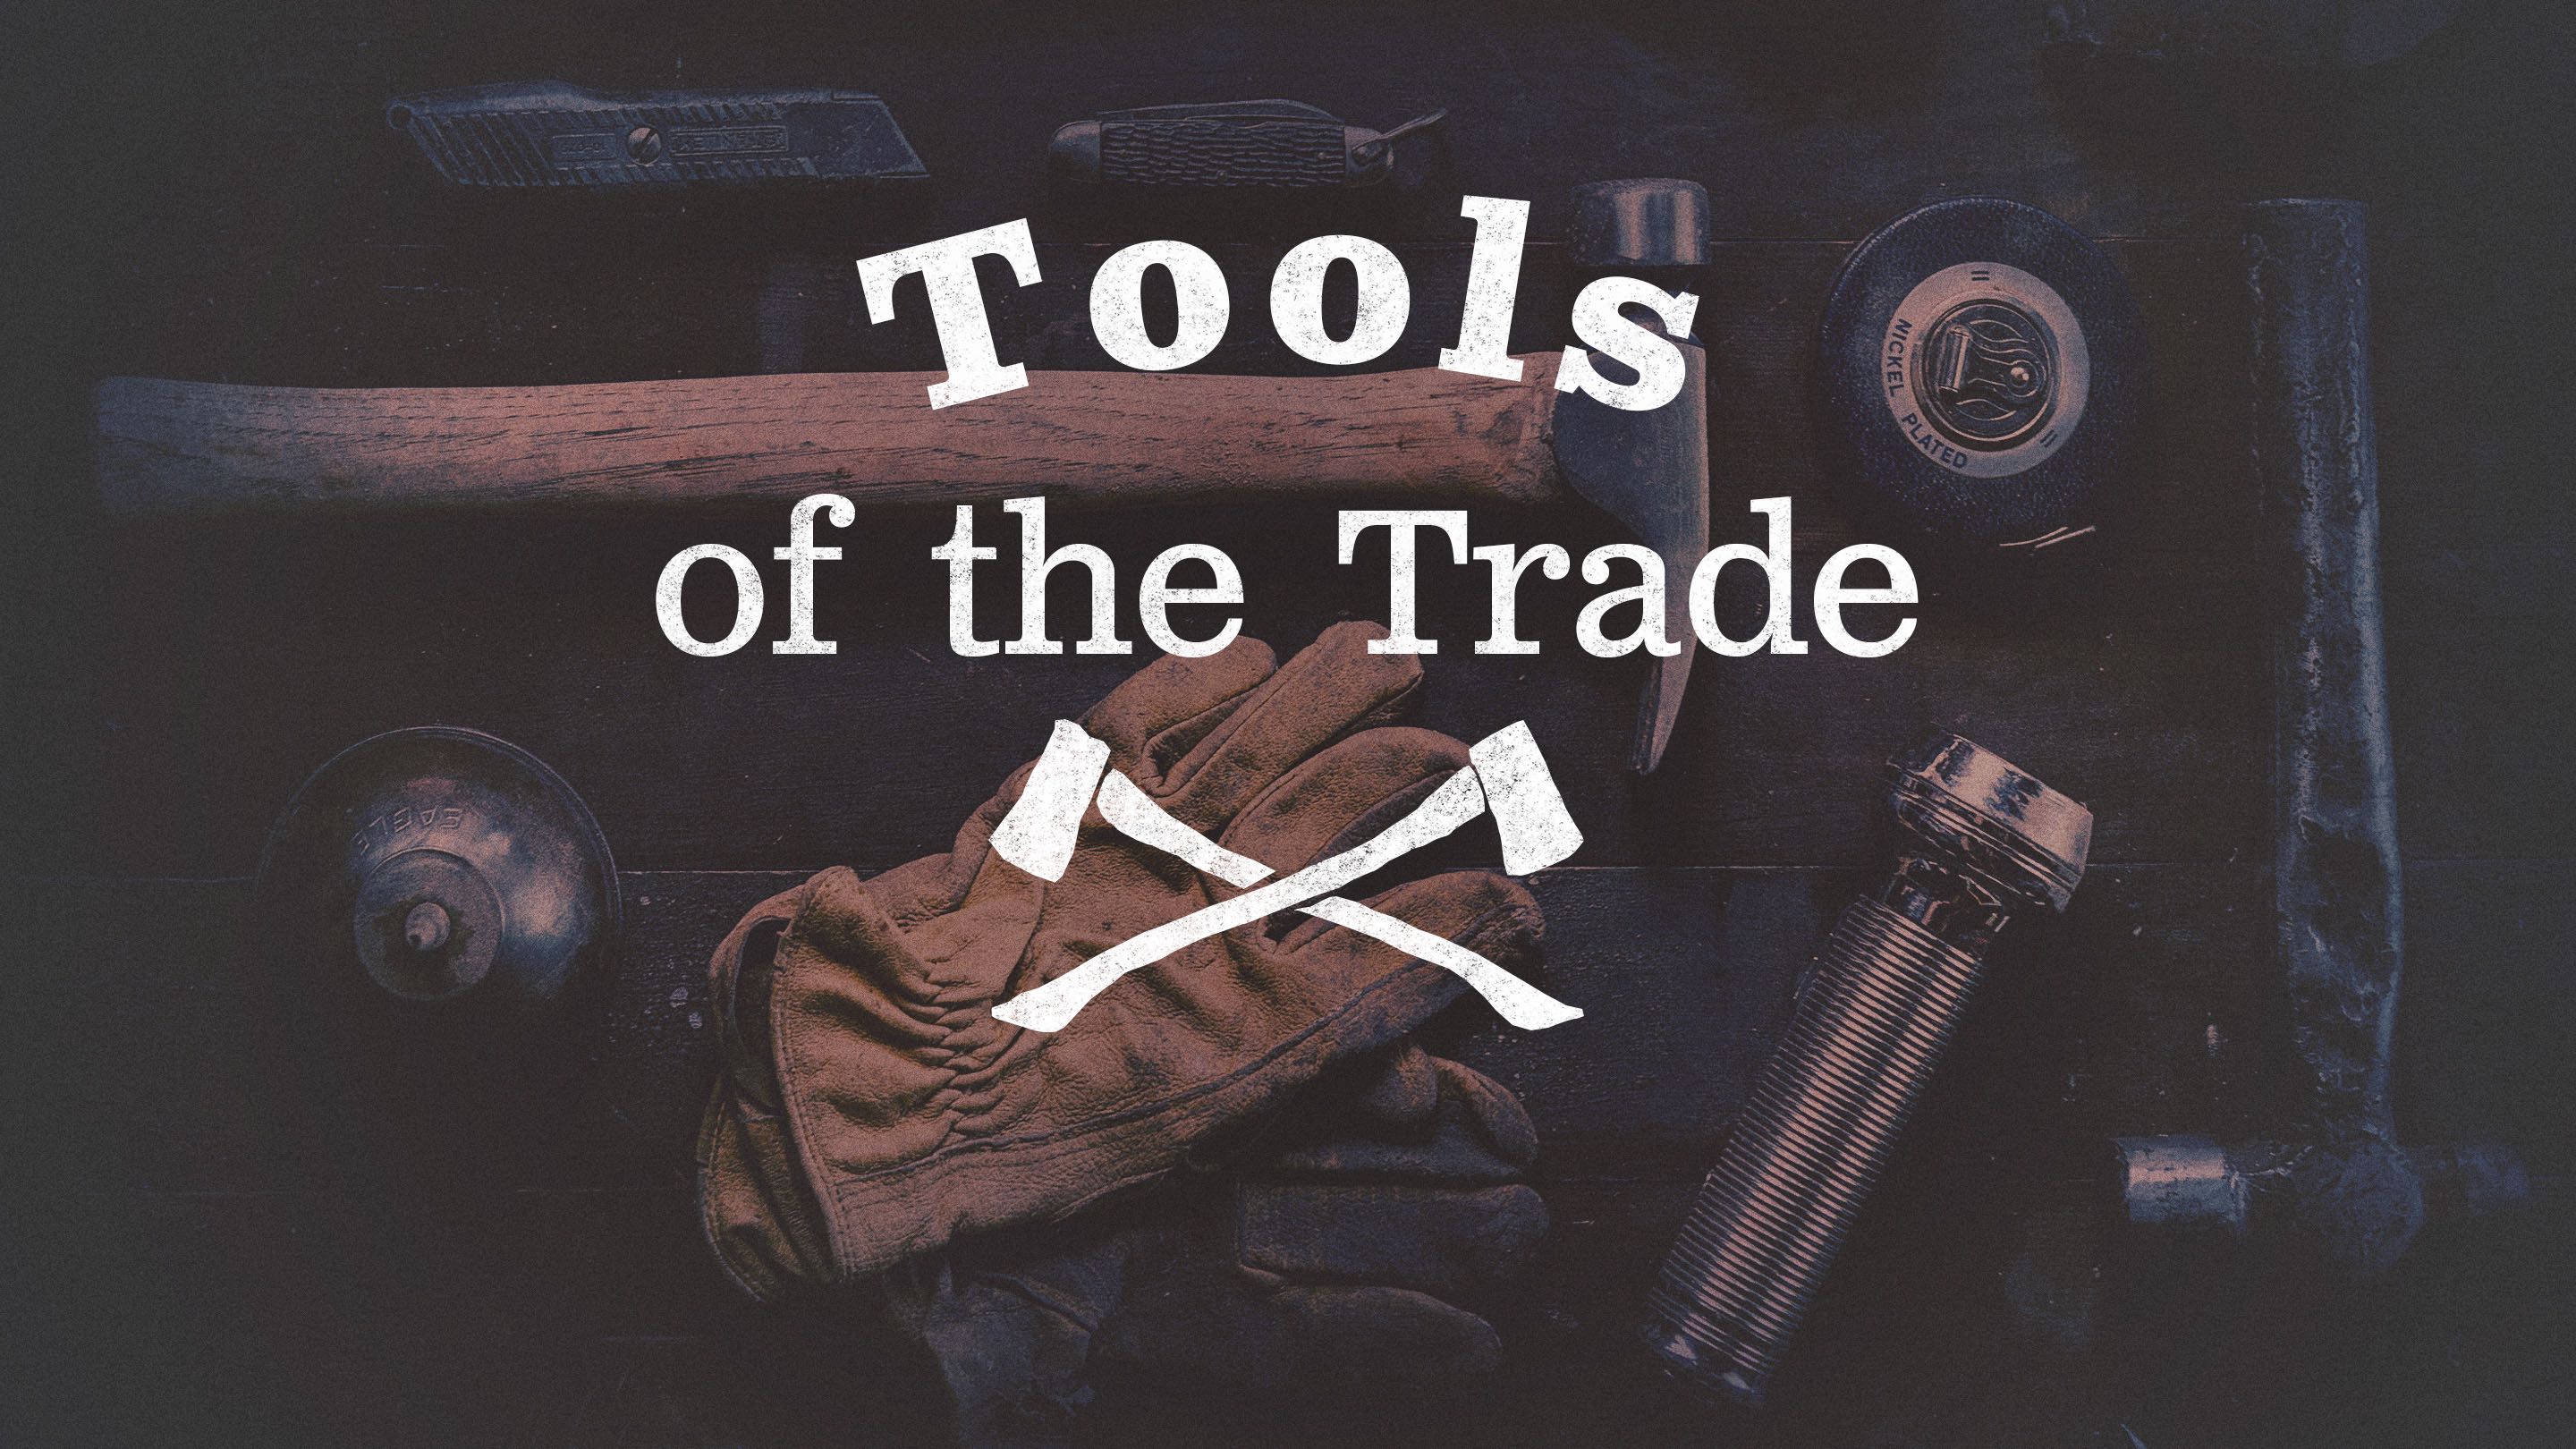 06-17-18 | Tools of the Trade | Mark Anderson